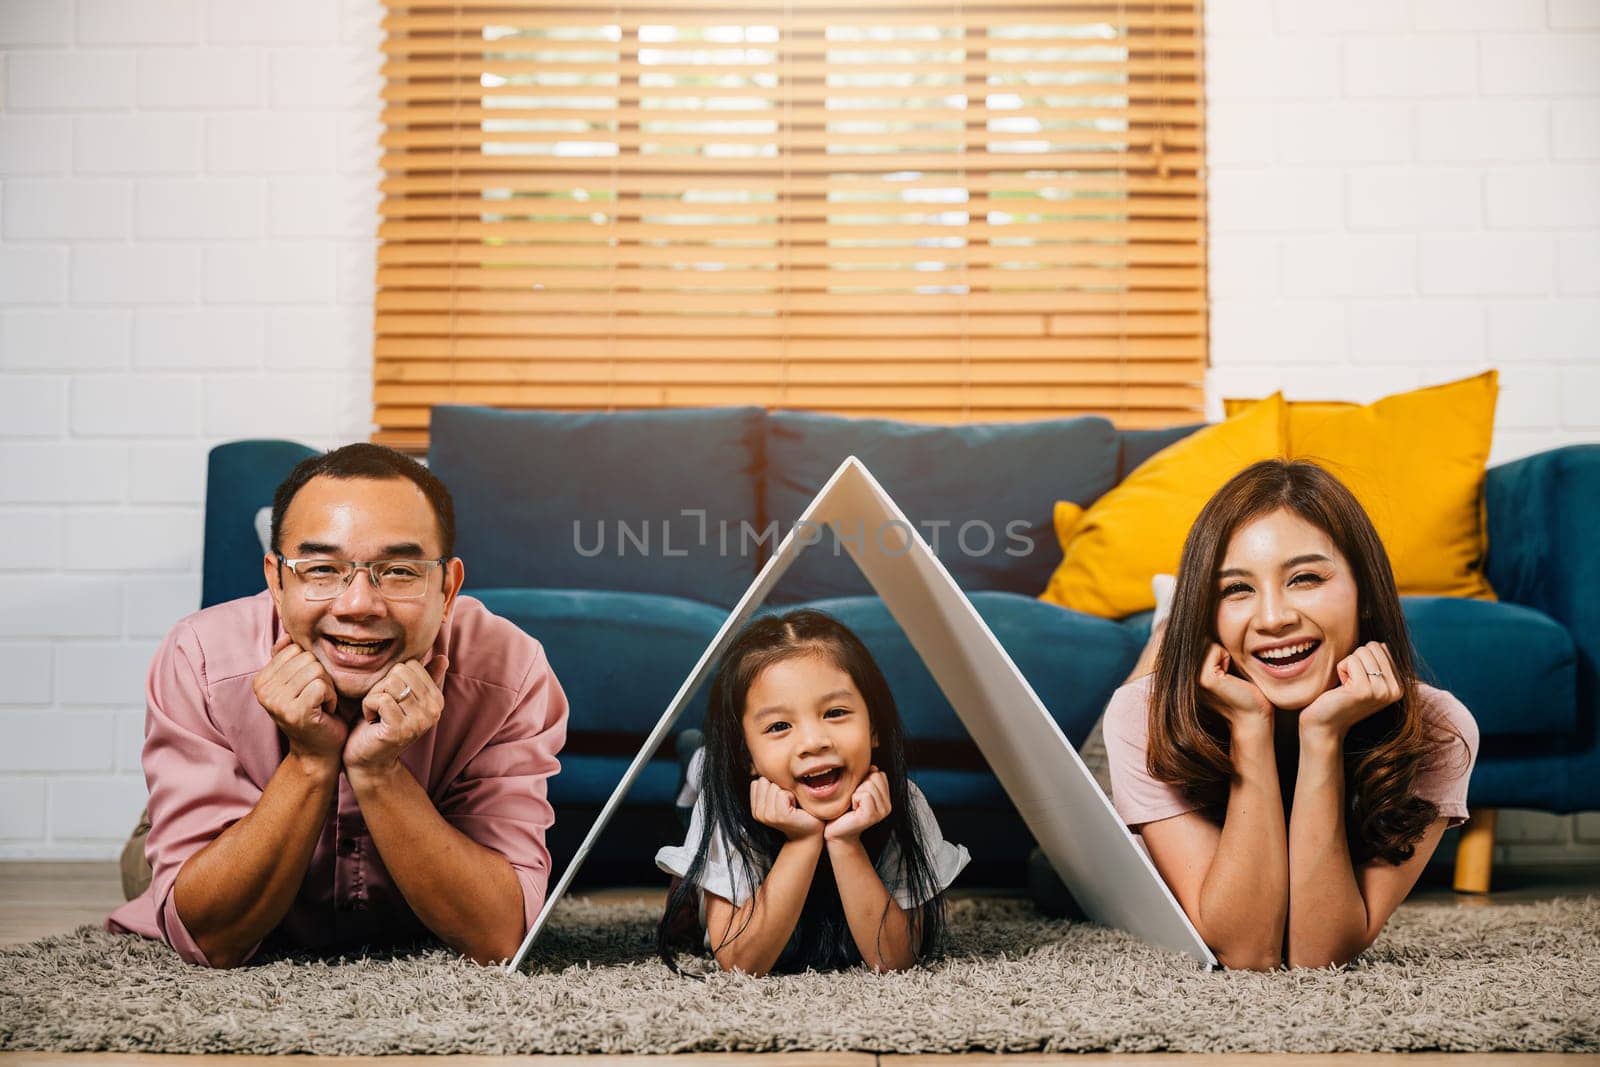 In their new house a loving family on a couch holds a cardboard roof showcasing the essence of happiness and security. Asian parents and their daughter are the picture of affectionate togetherness.